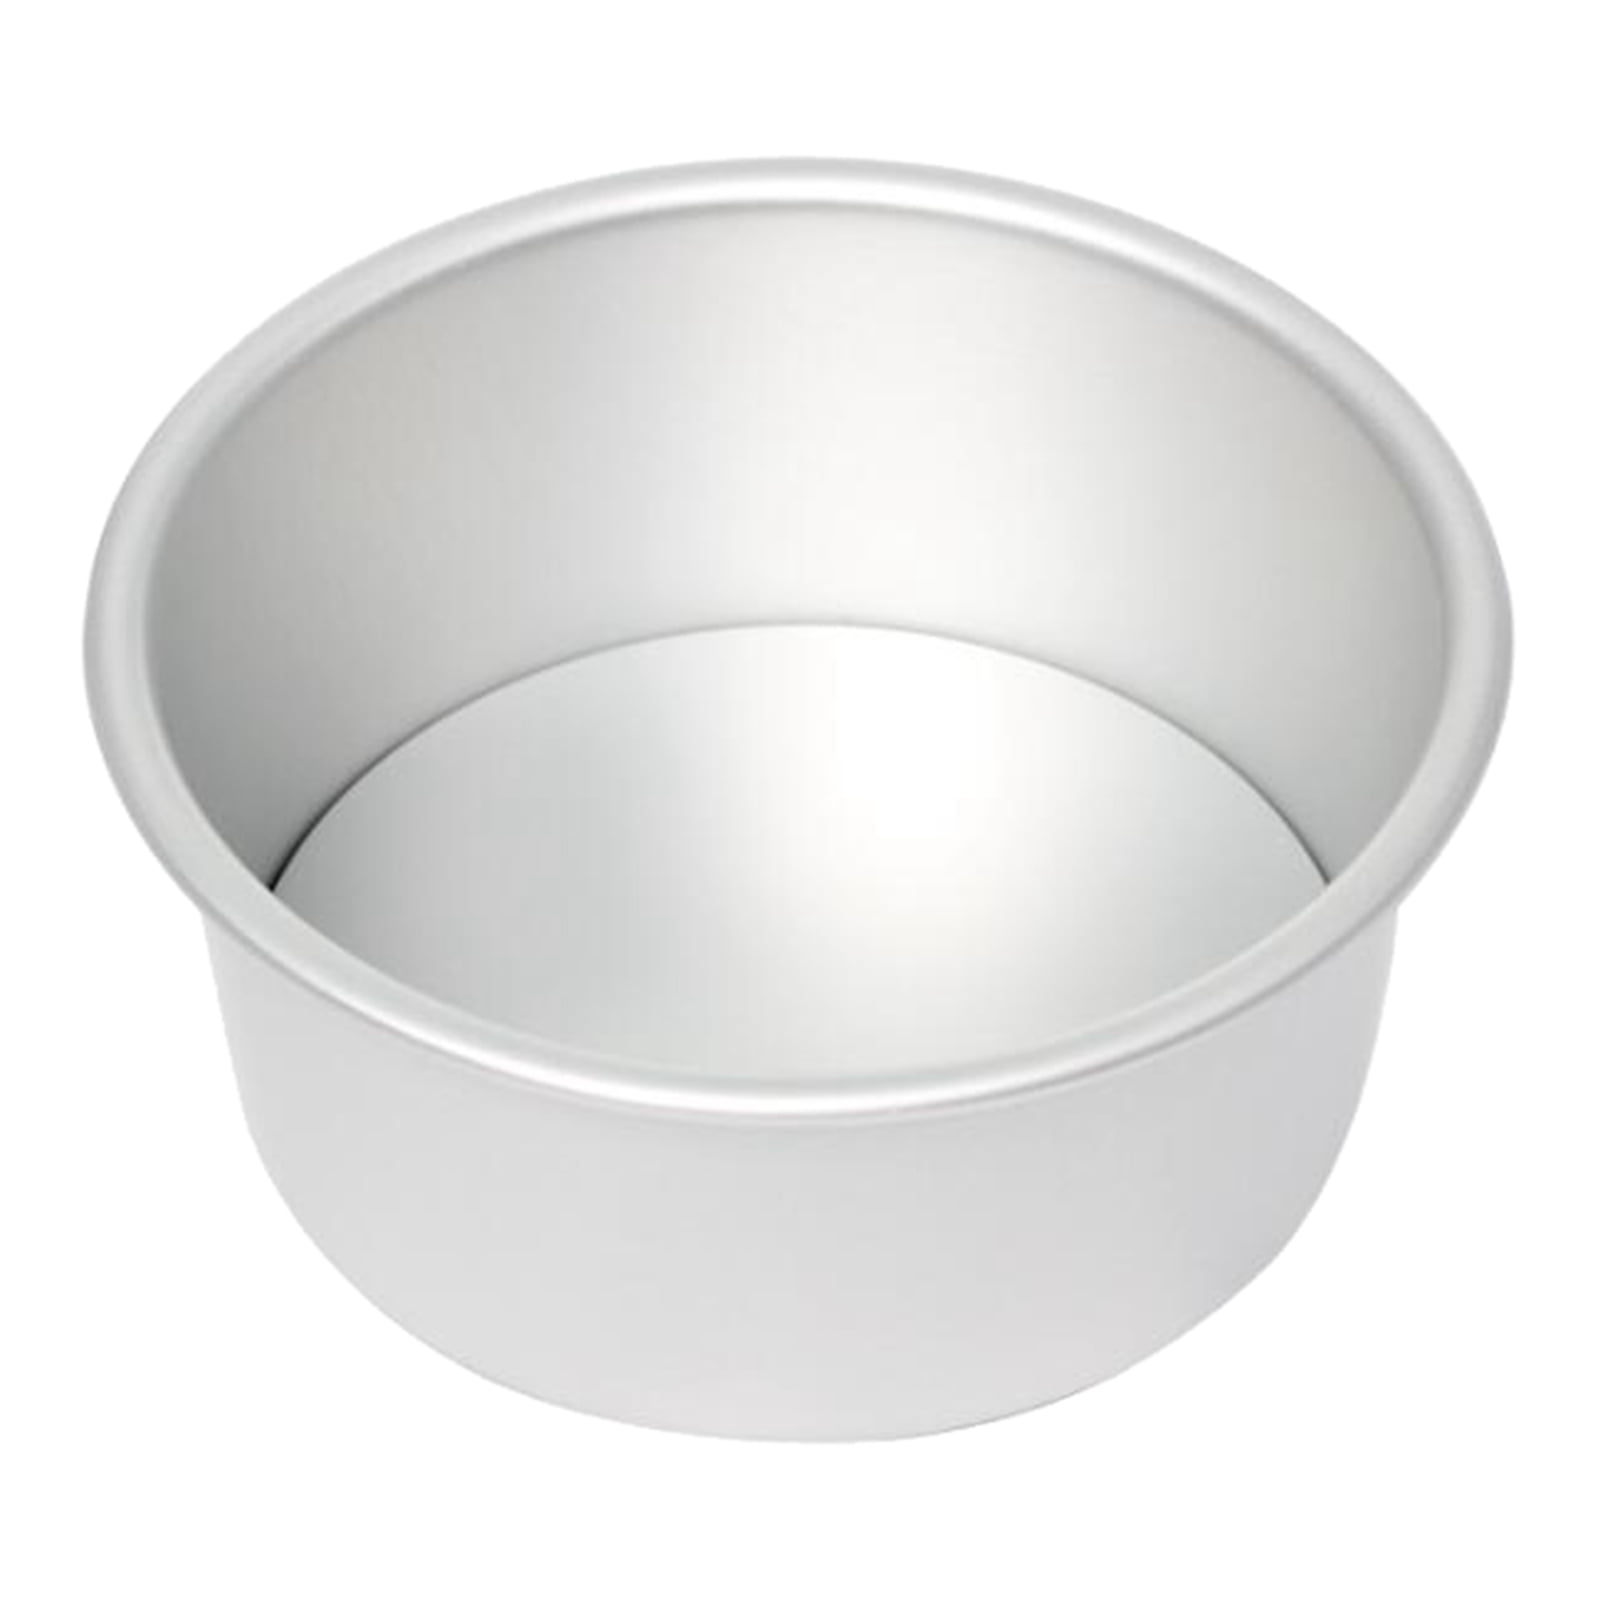 3812 2-Pack Norpro 9 Inch Stainless Steel Round Cake Pan 